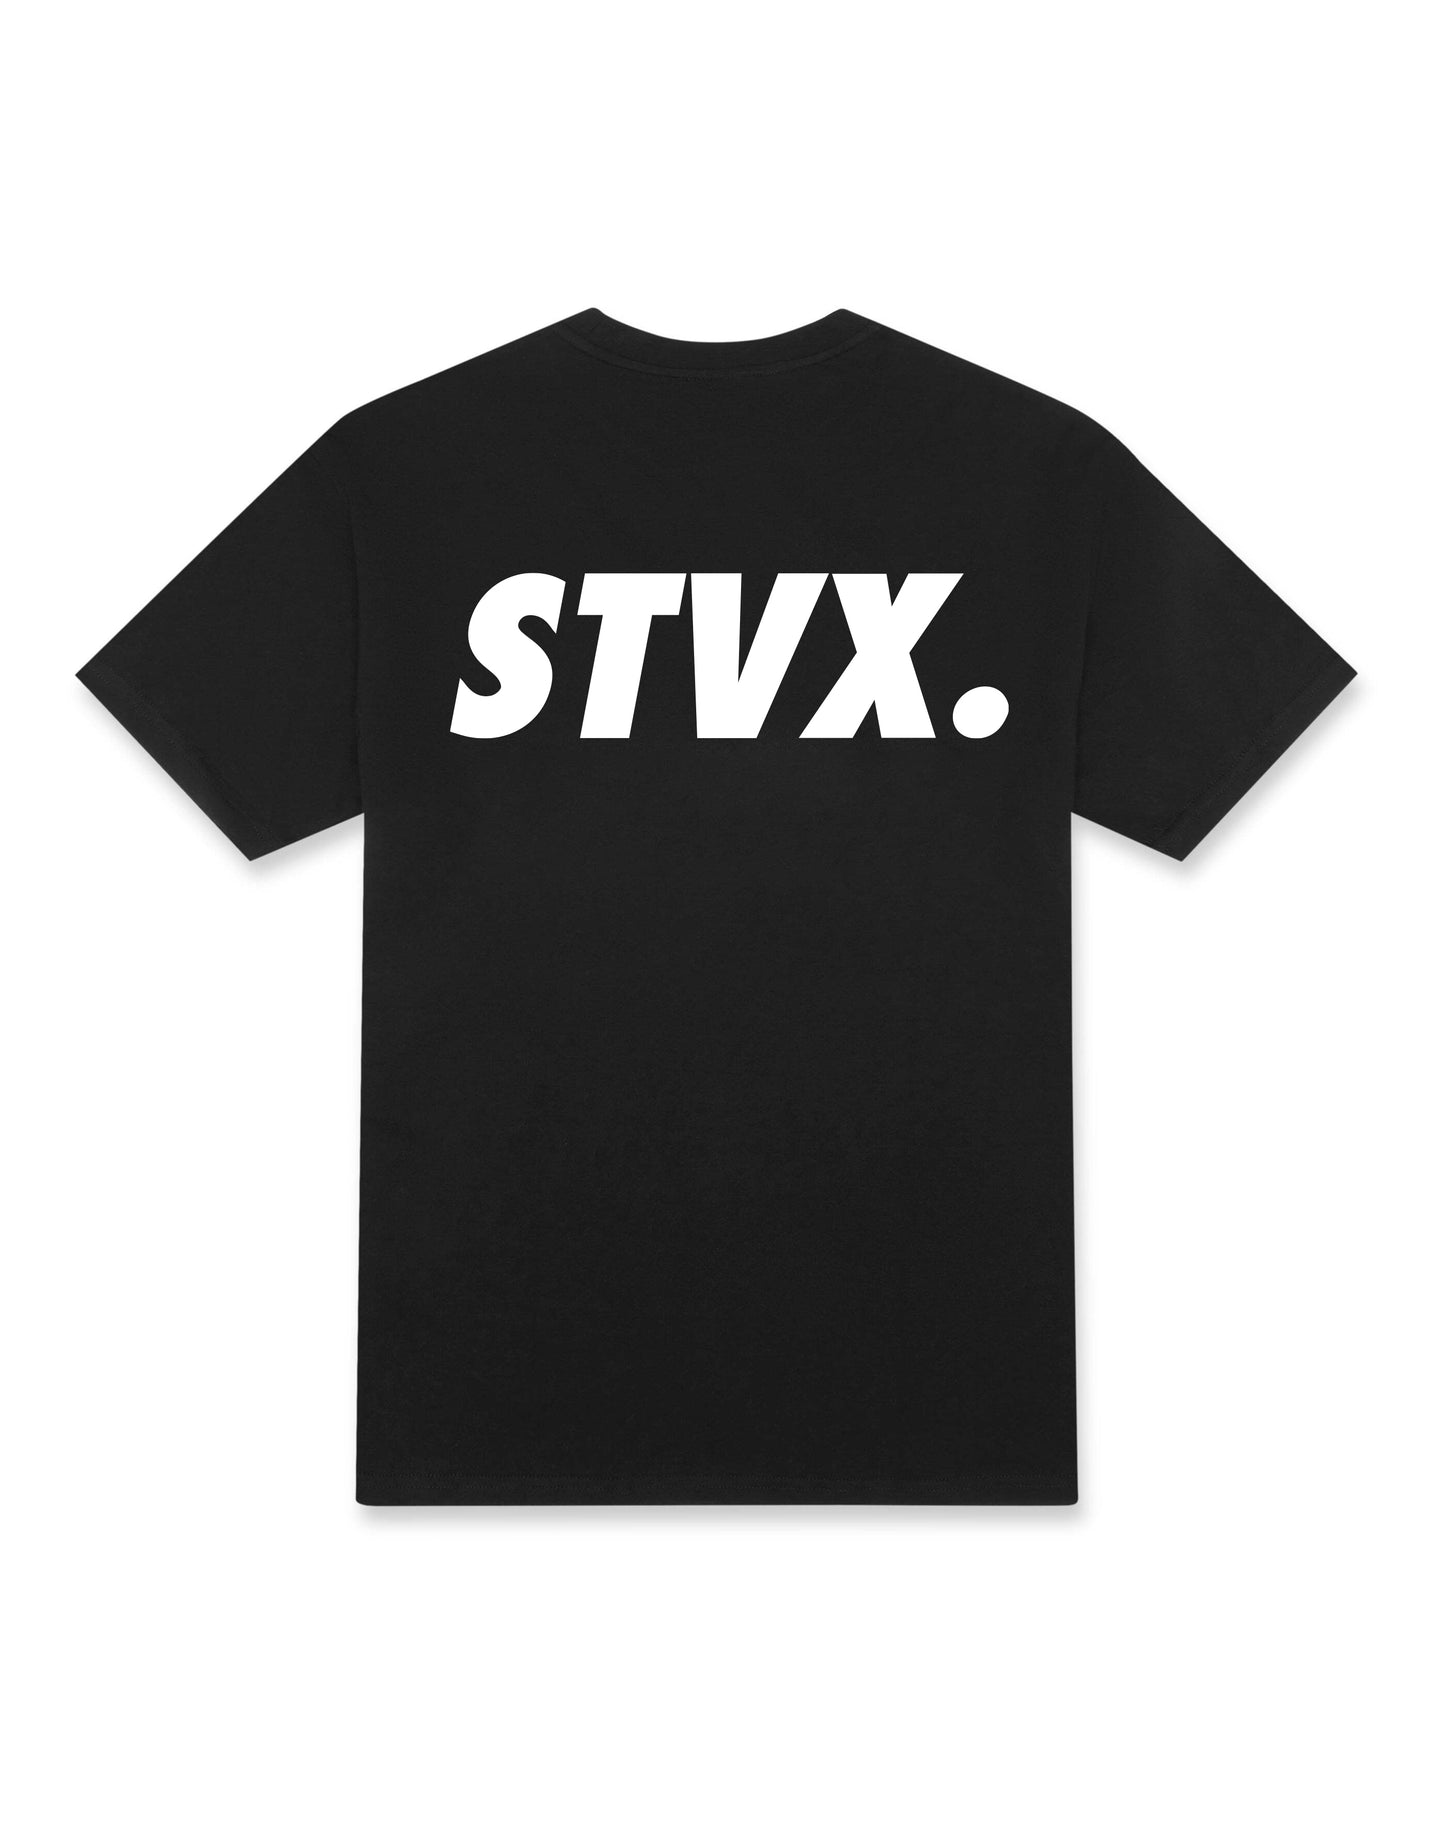 STAXOFFICIAL Edit Tee - Black